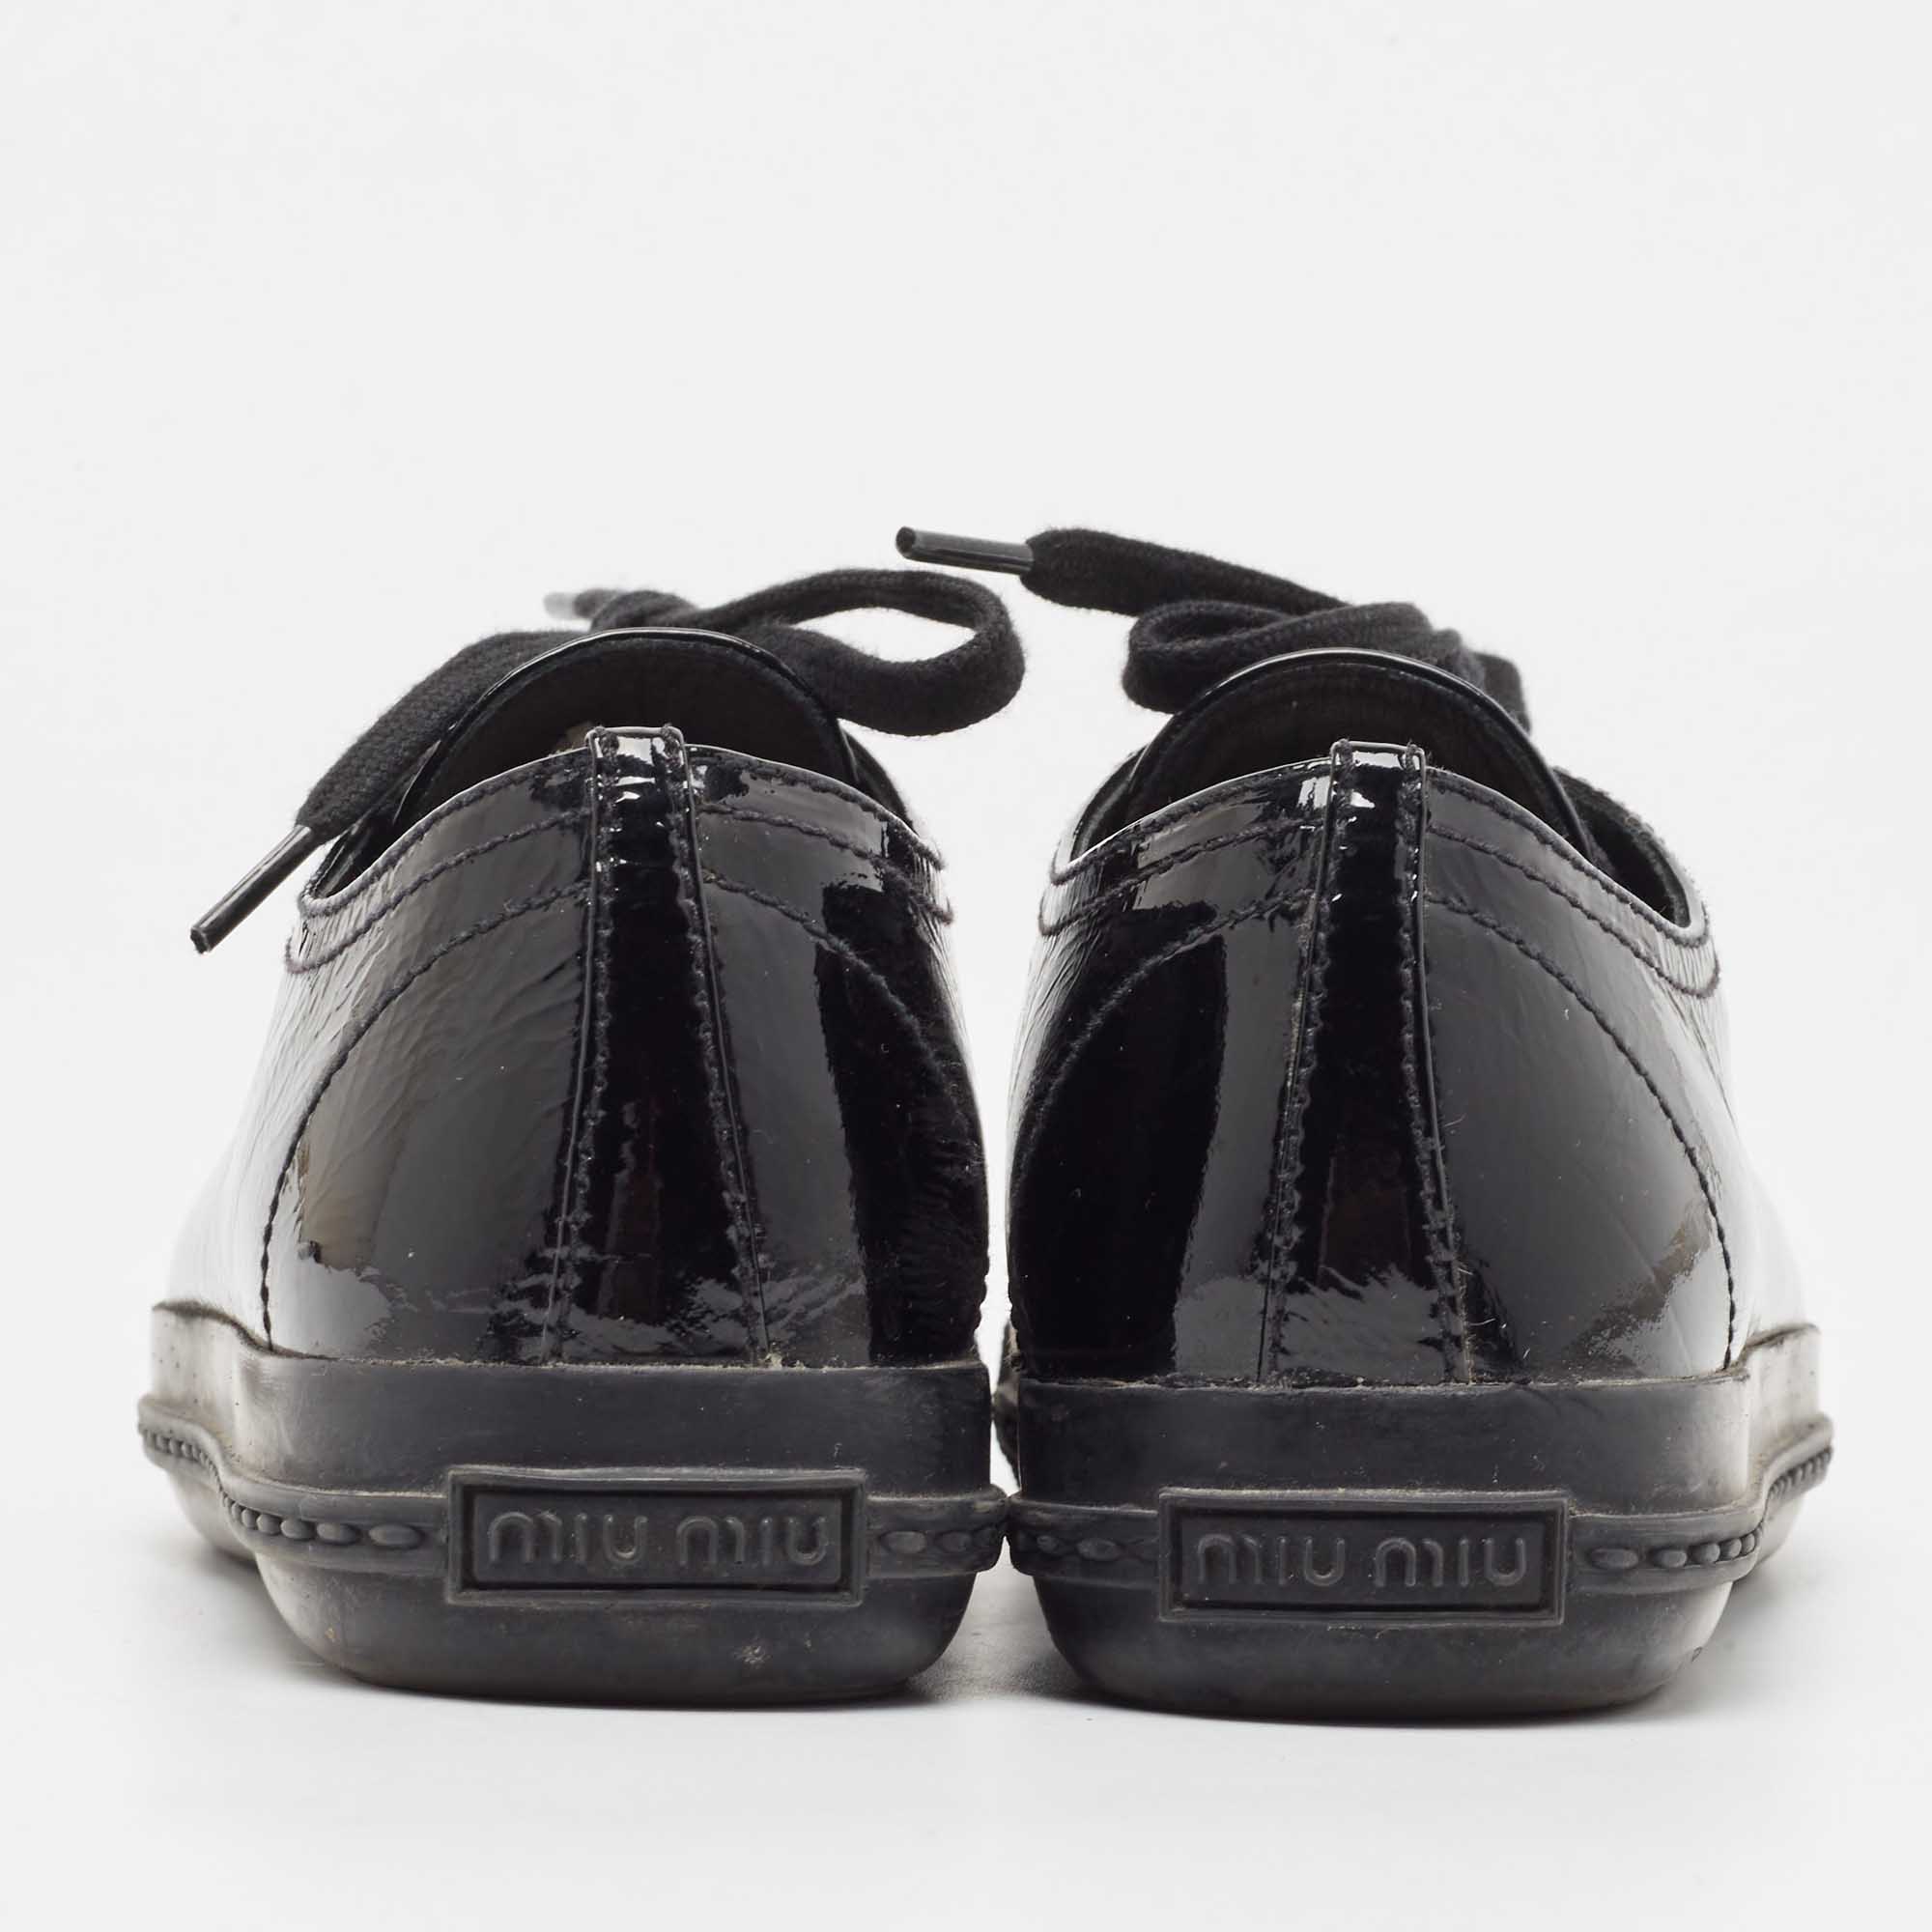 Miu Miu Black Patent Leather Crystal Studded Sneakers Size 37